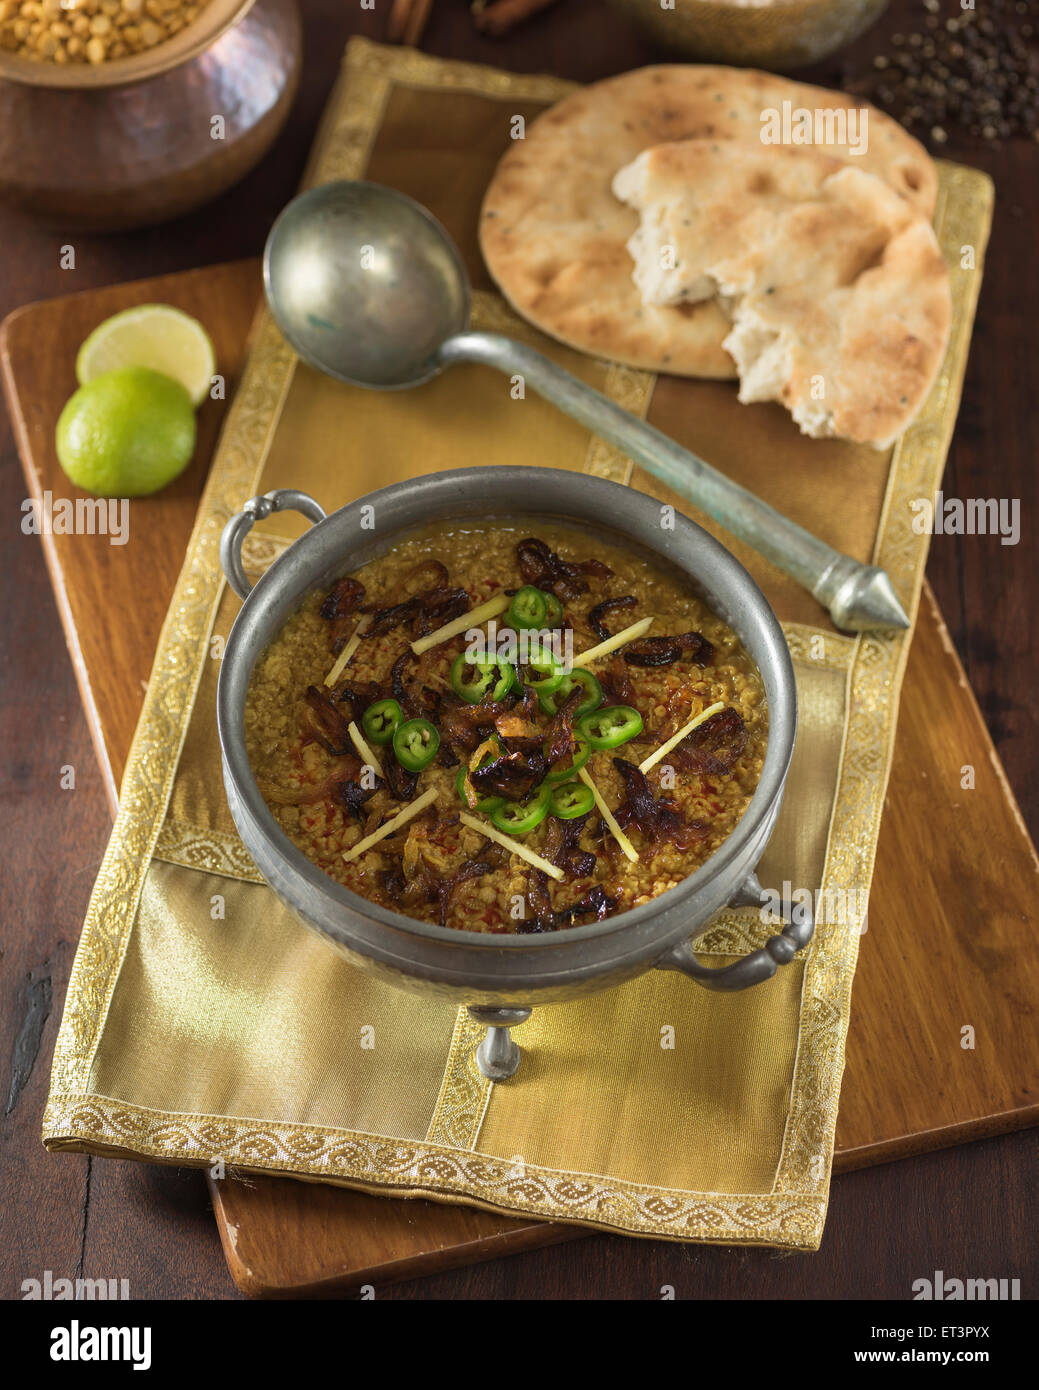 Haleem. Lentil, meat and barley dish. Middle East and India Food Stock Photo